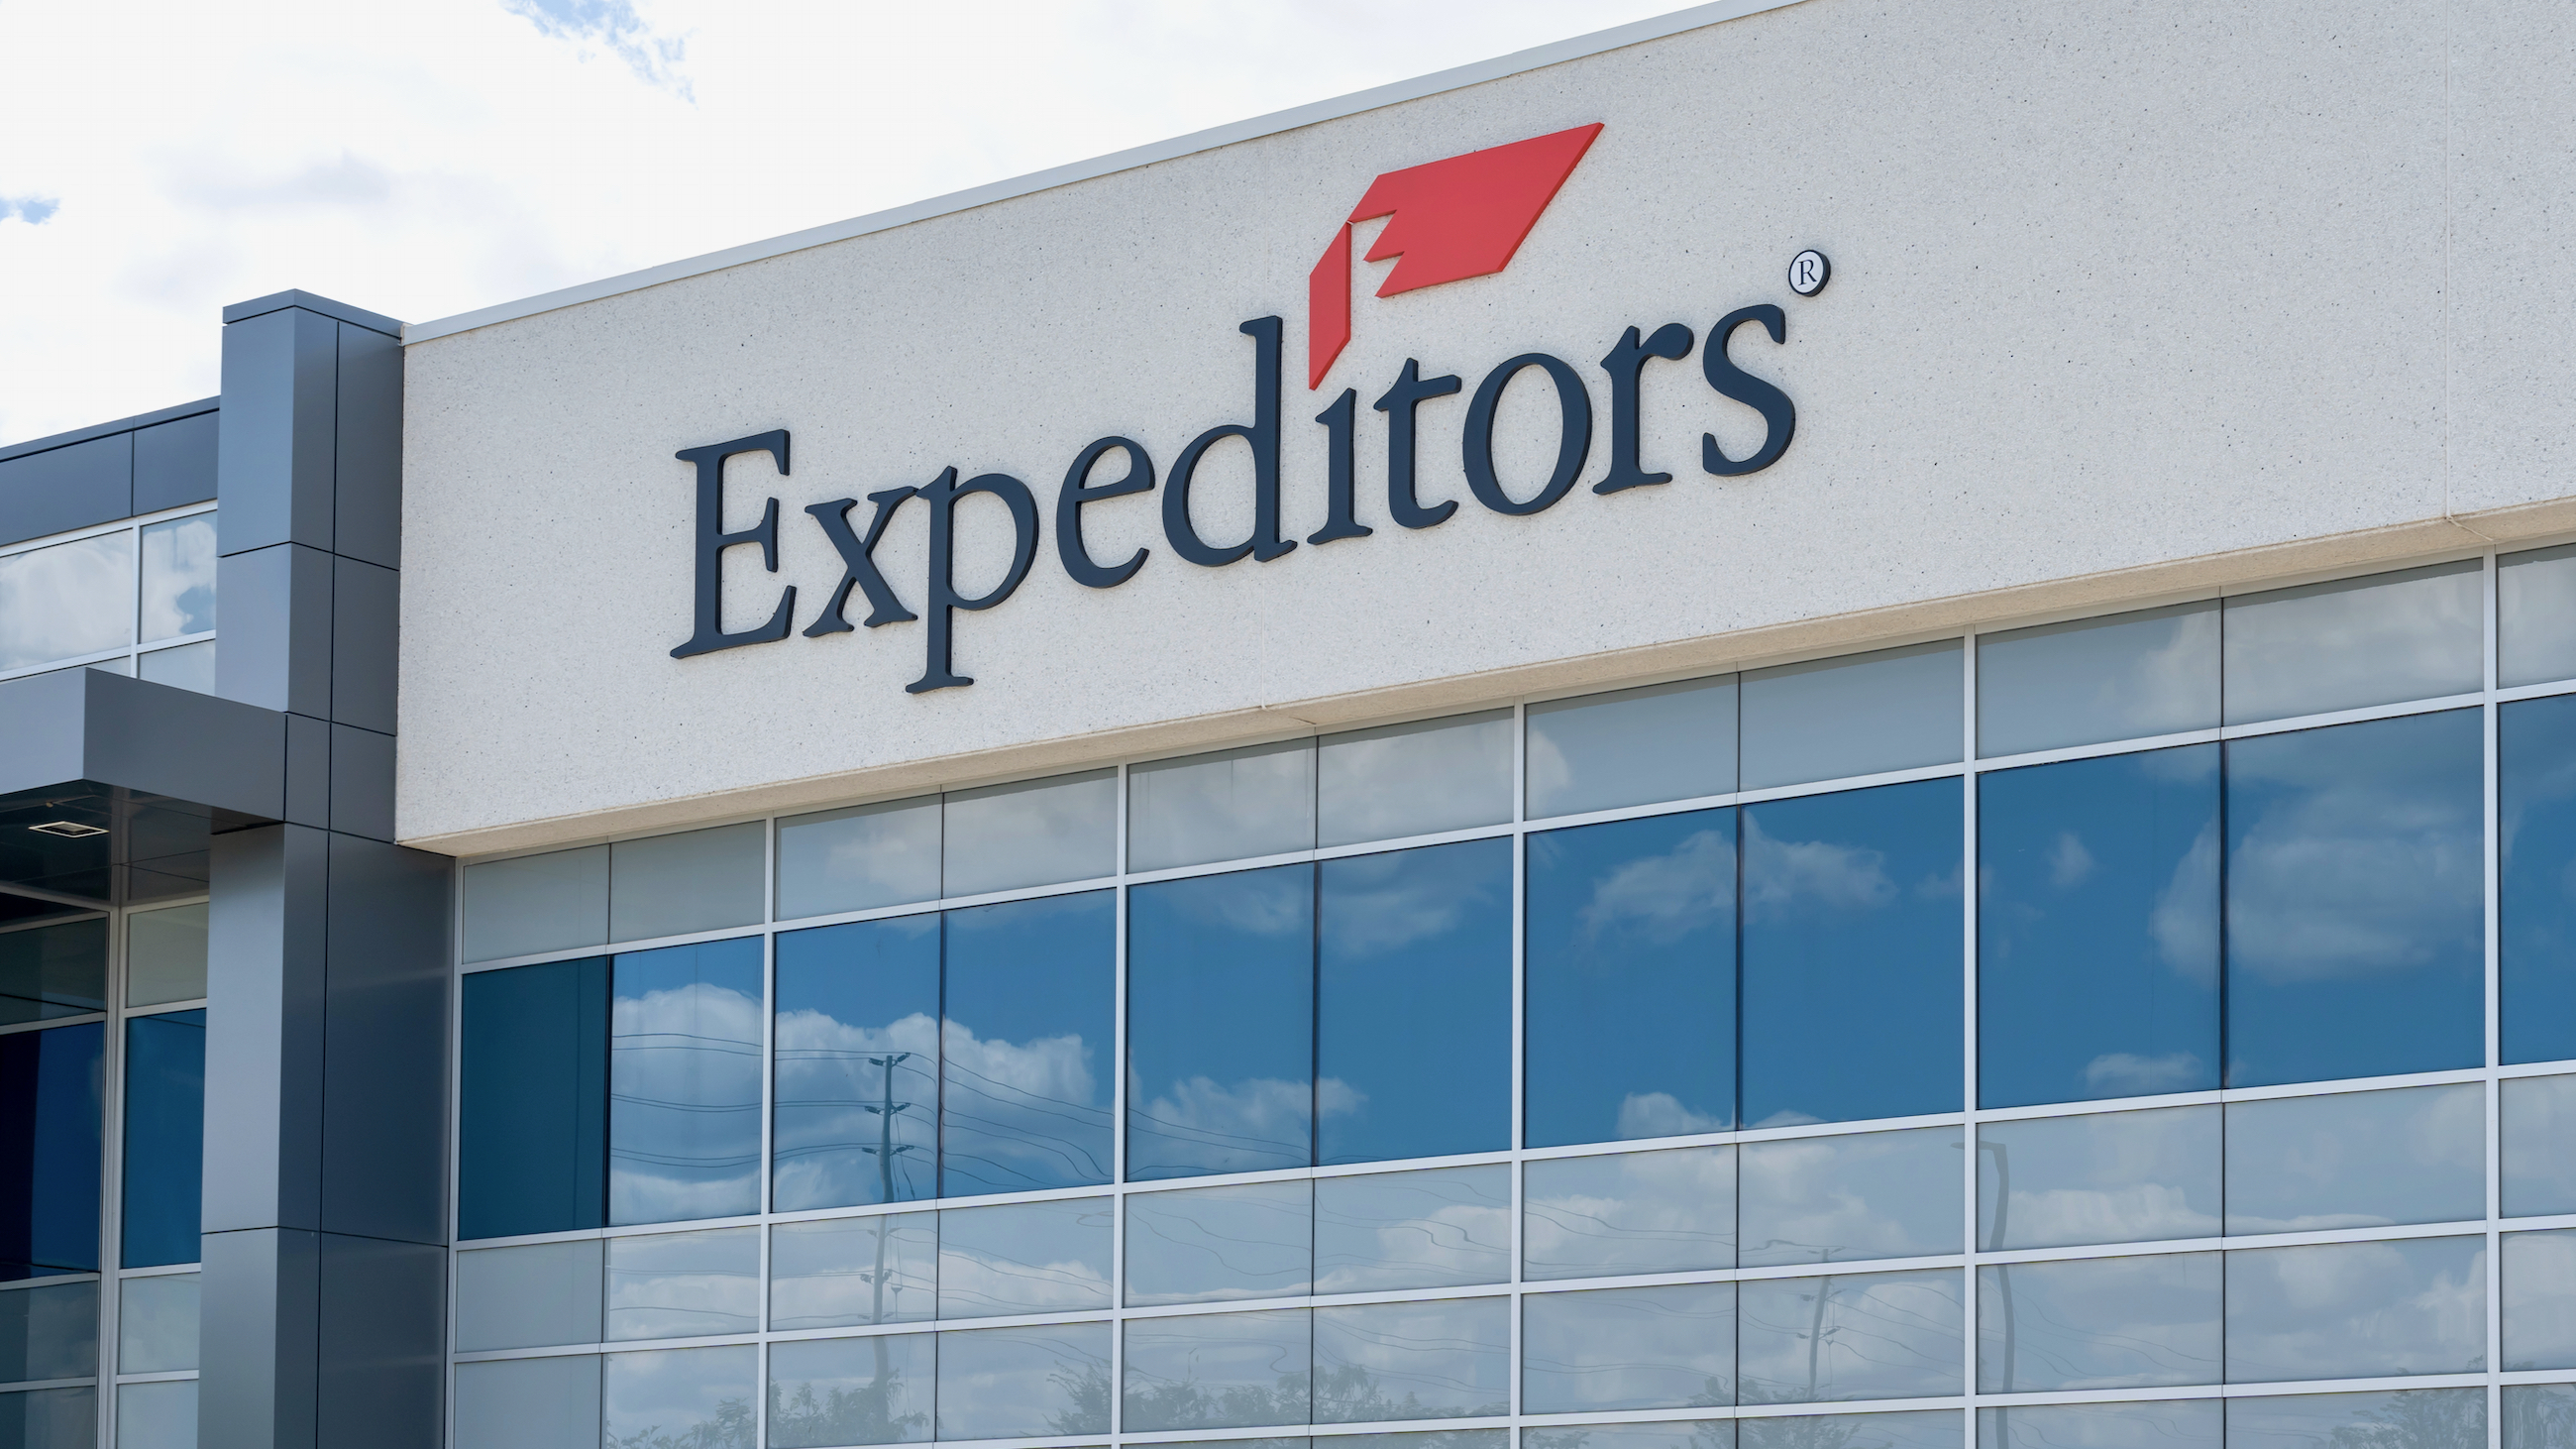 global logistics giant expeditors suffers cyberattack, shuts down operations systems - freightwaves